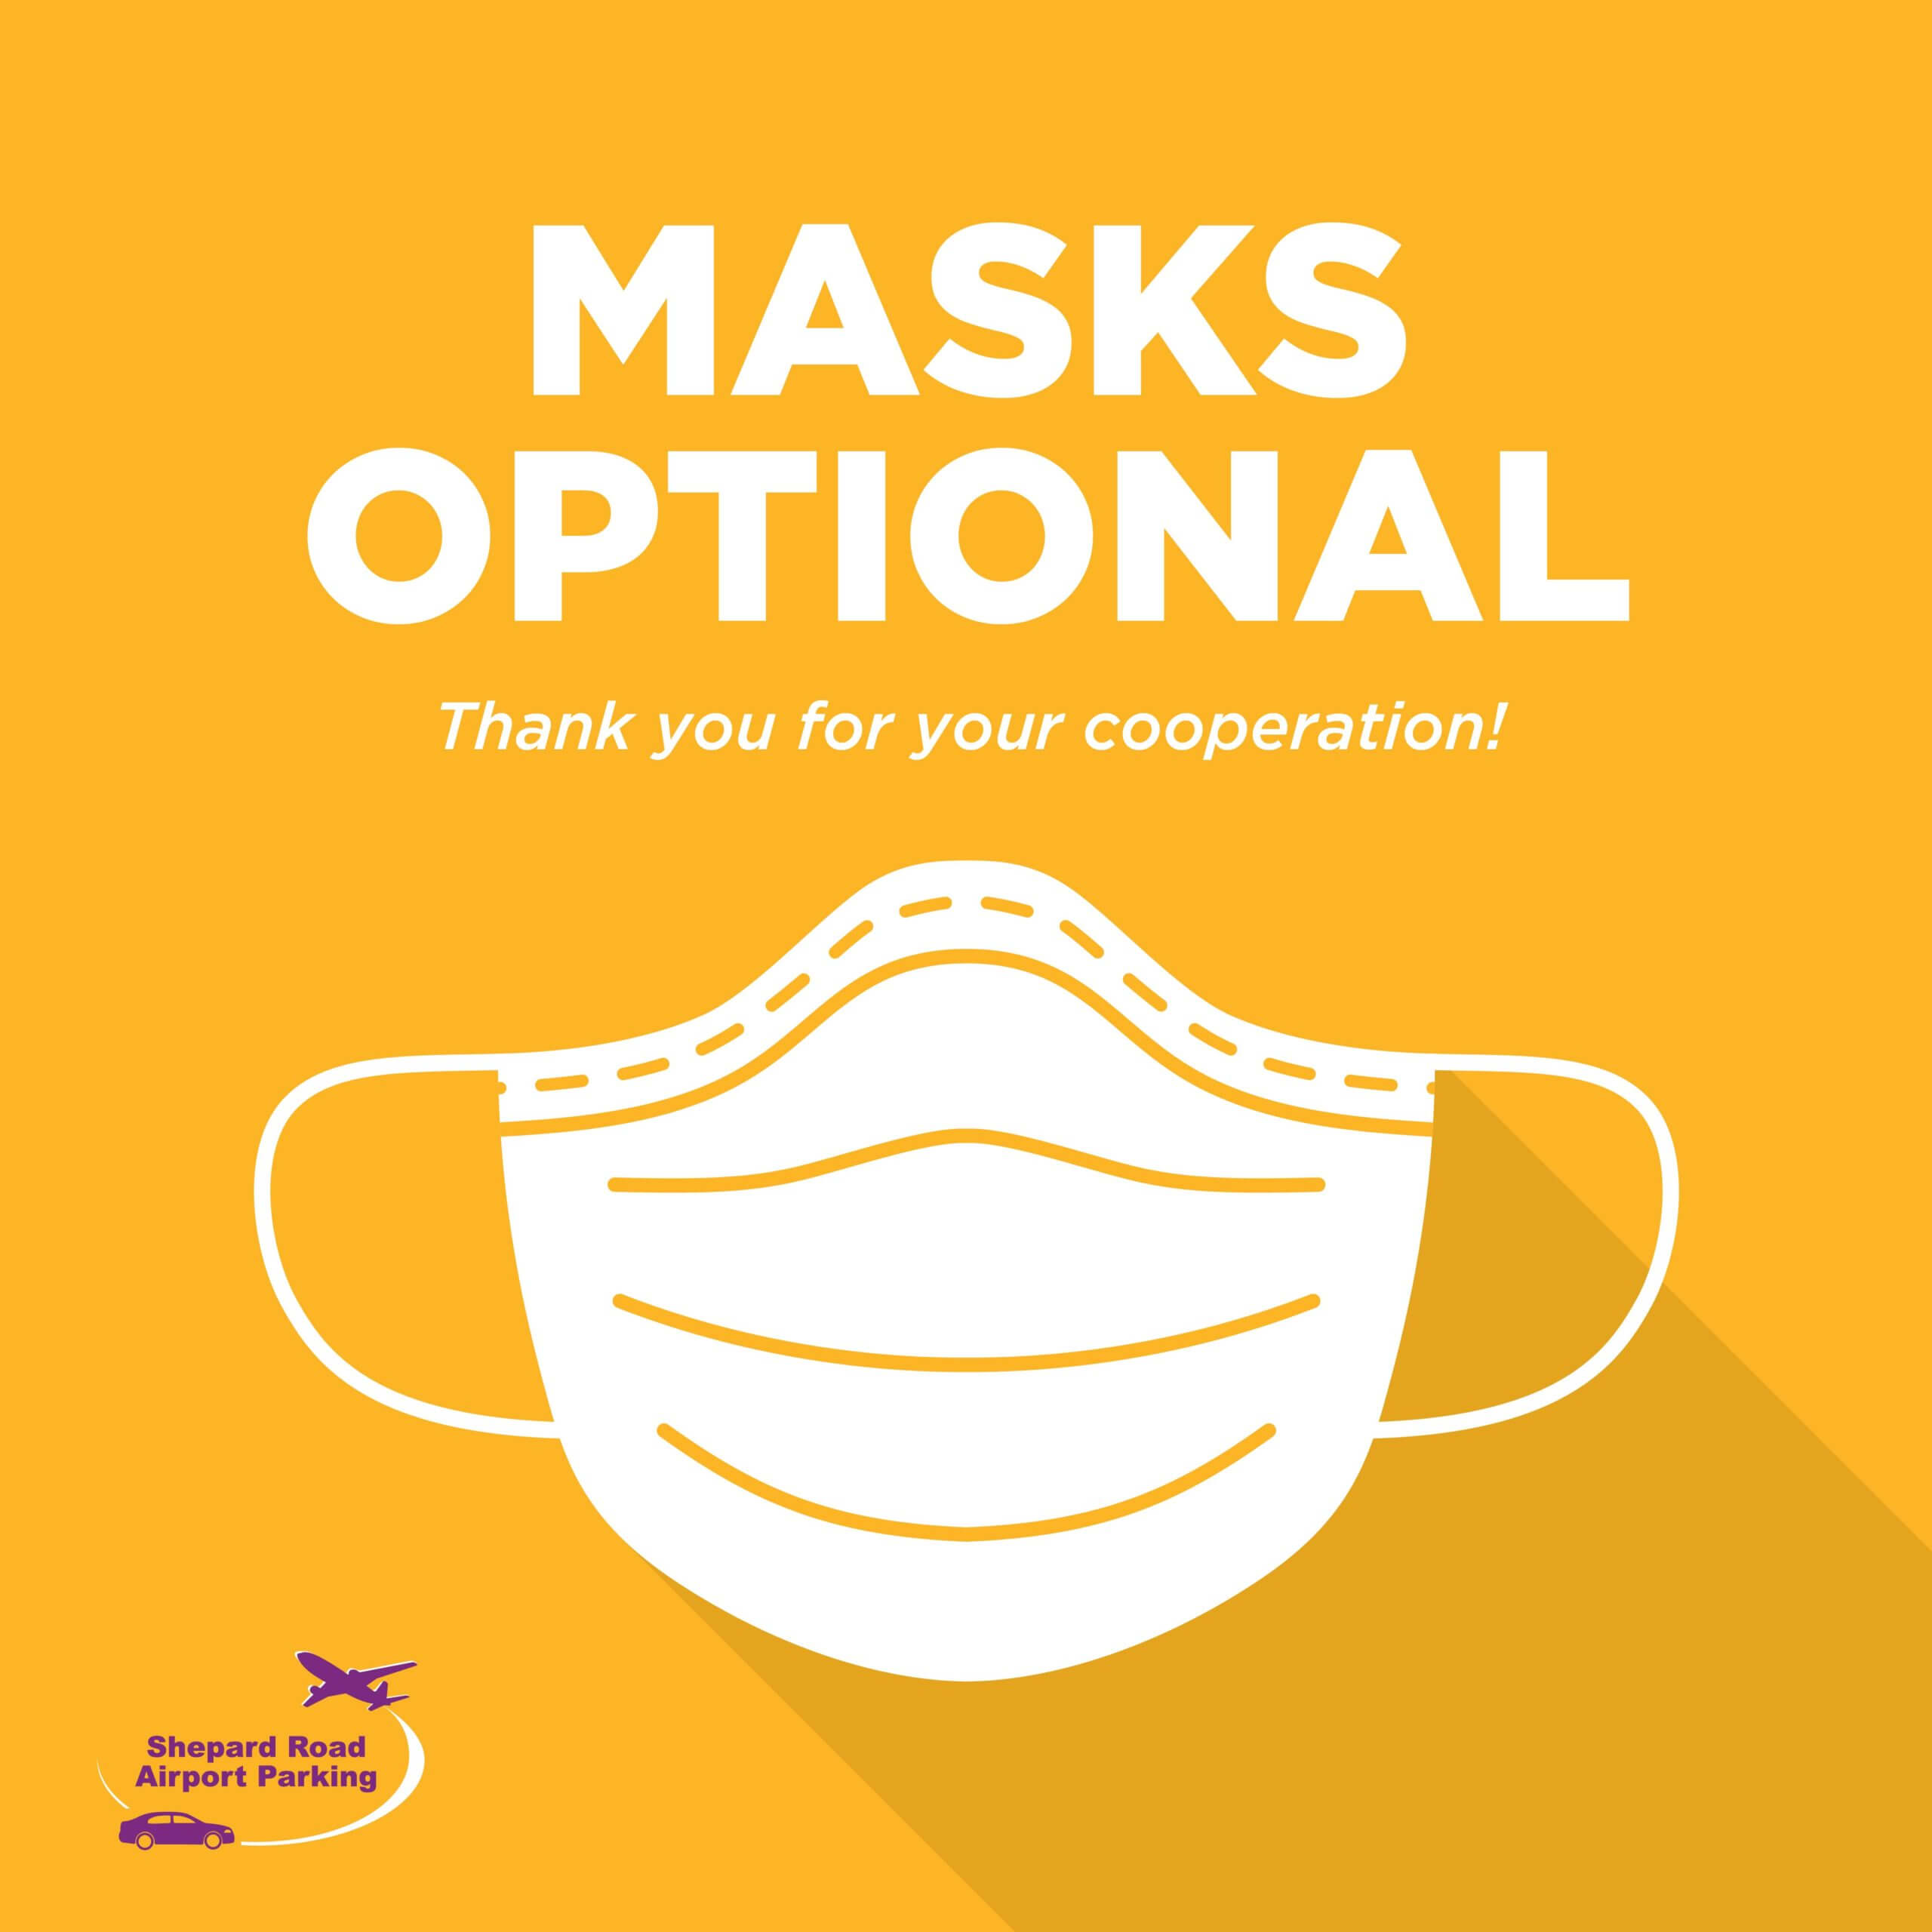 Masks Optional - Thank you for your cooperation